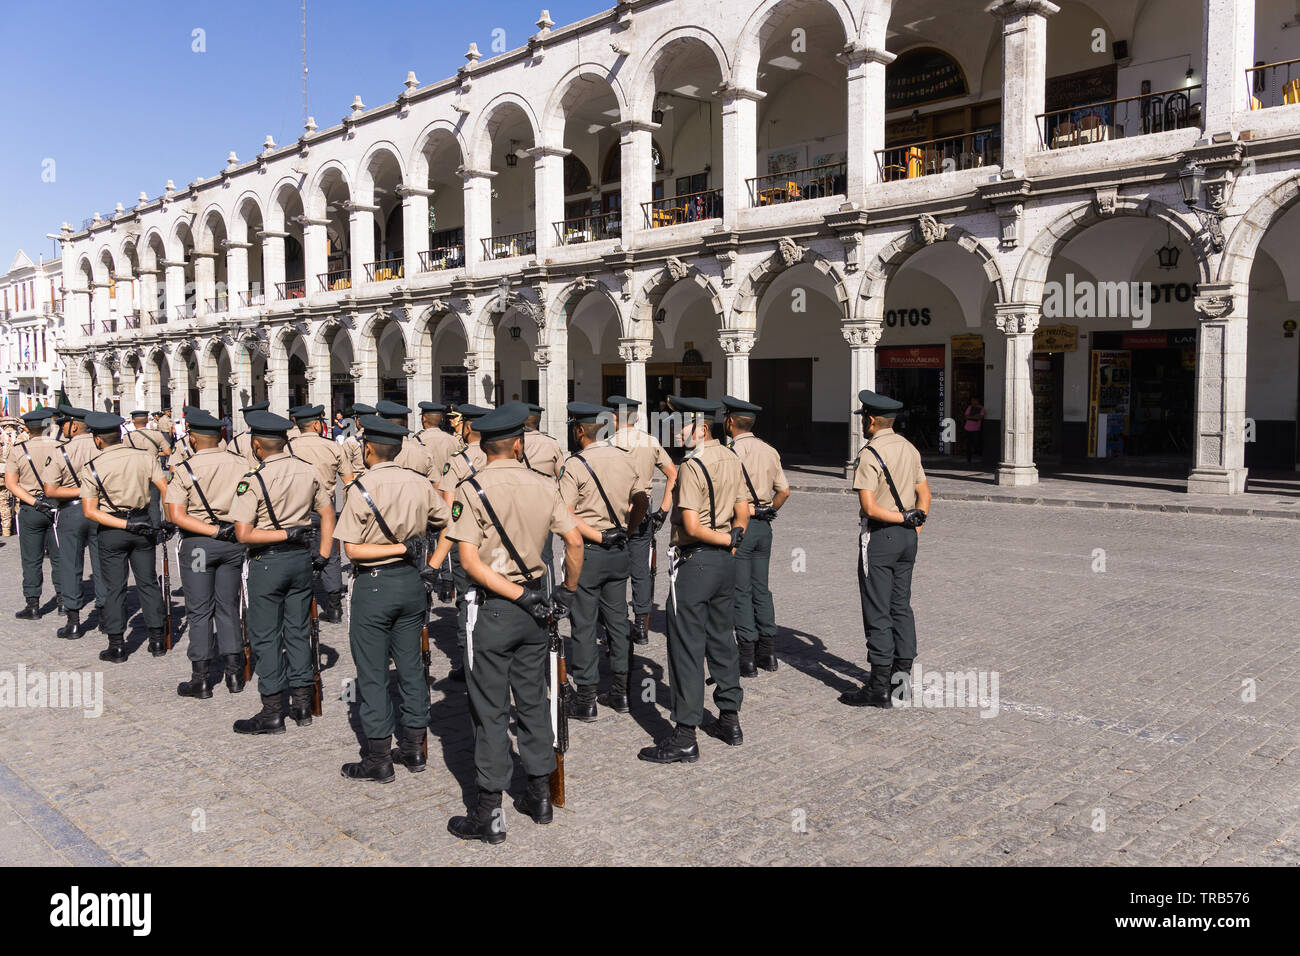 Military students parade at Plaza de Armas in Arequipa, Peru. Stock Photo